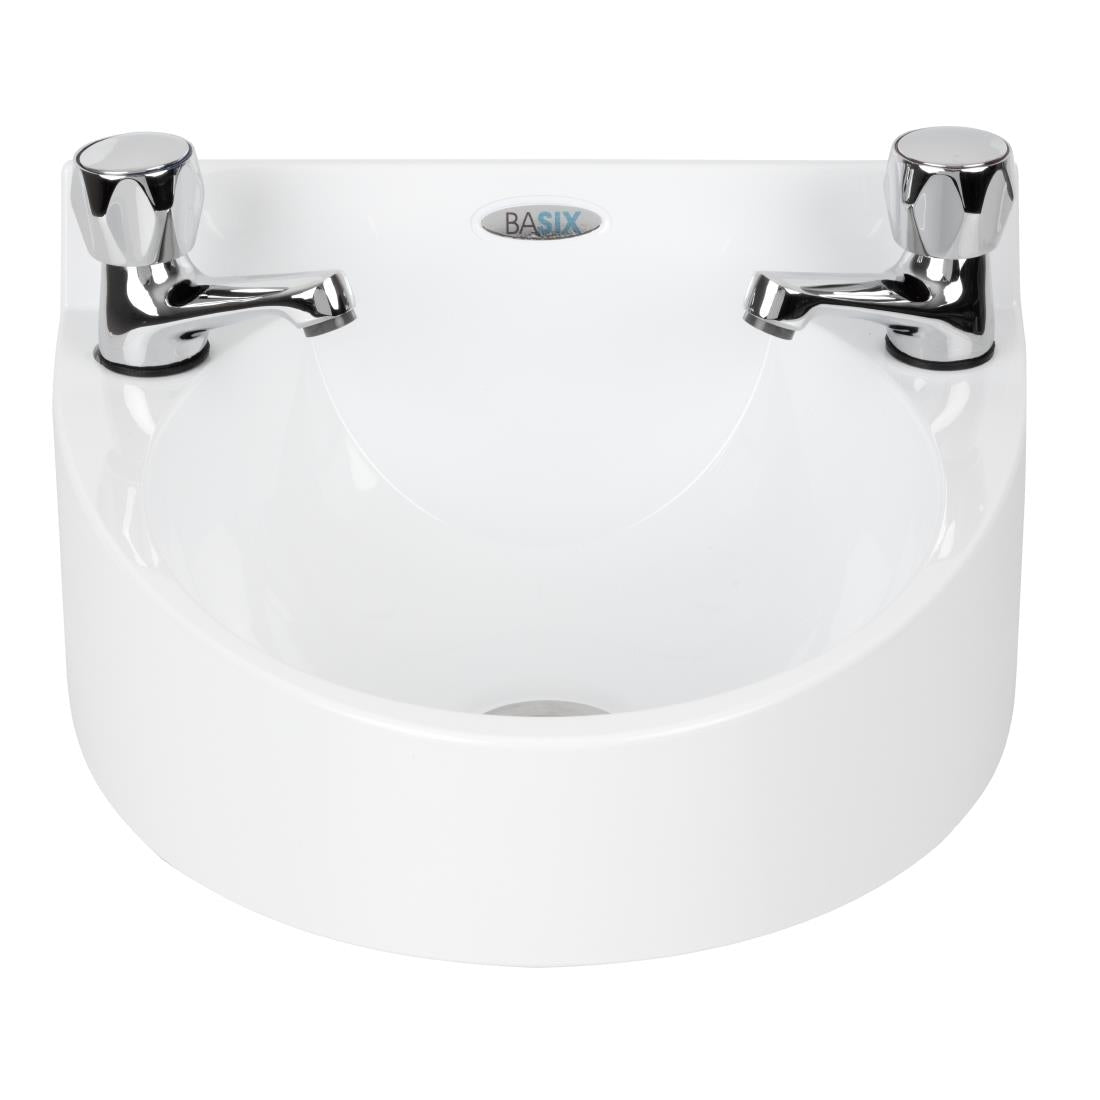 Basix Polycarbonate Wash Hand Basin White JD Catering Equipment Solutions Ltd